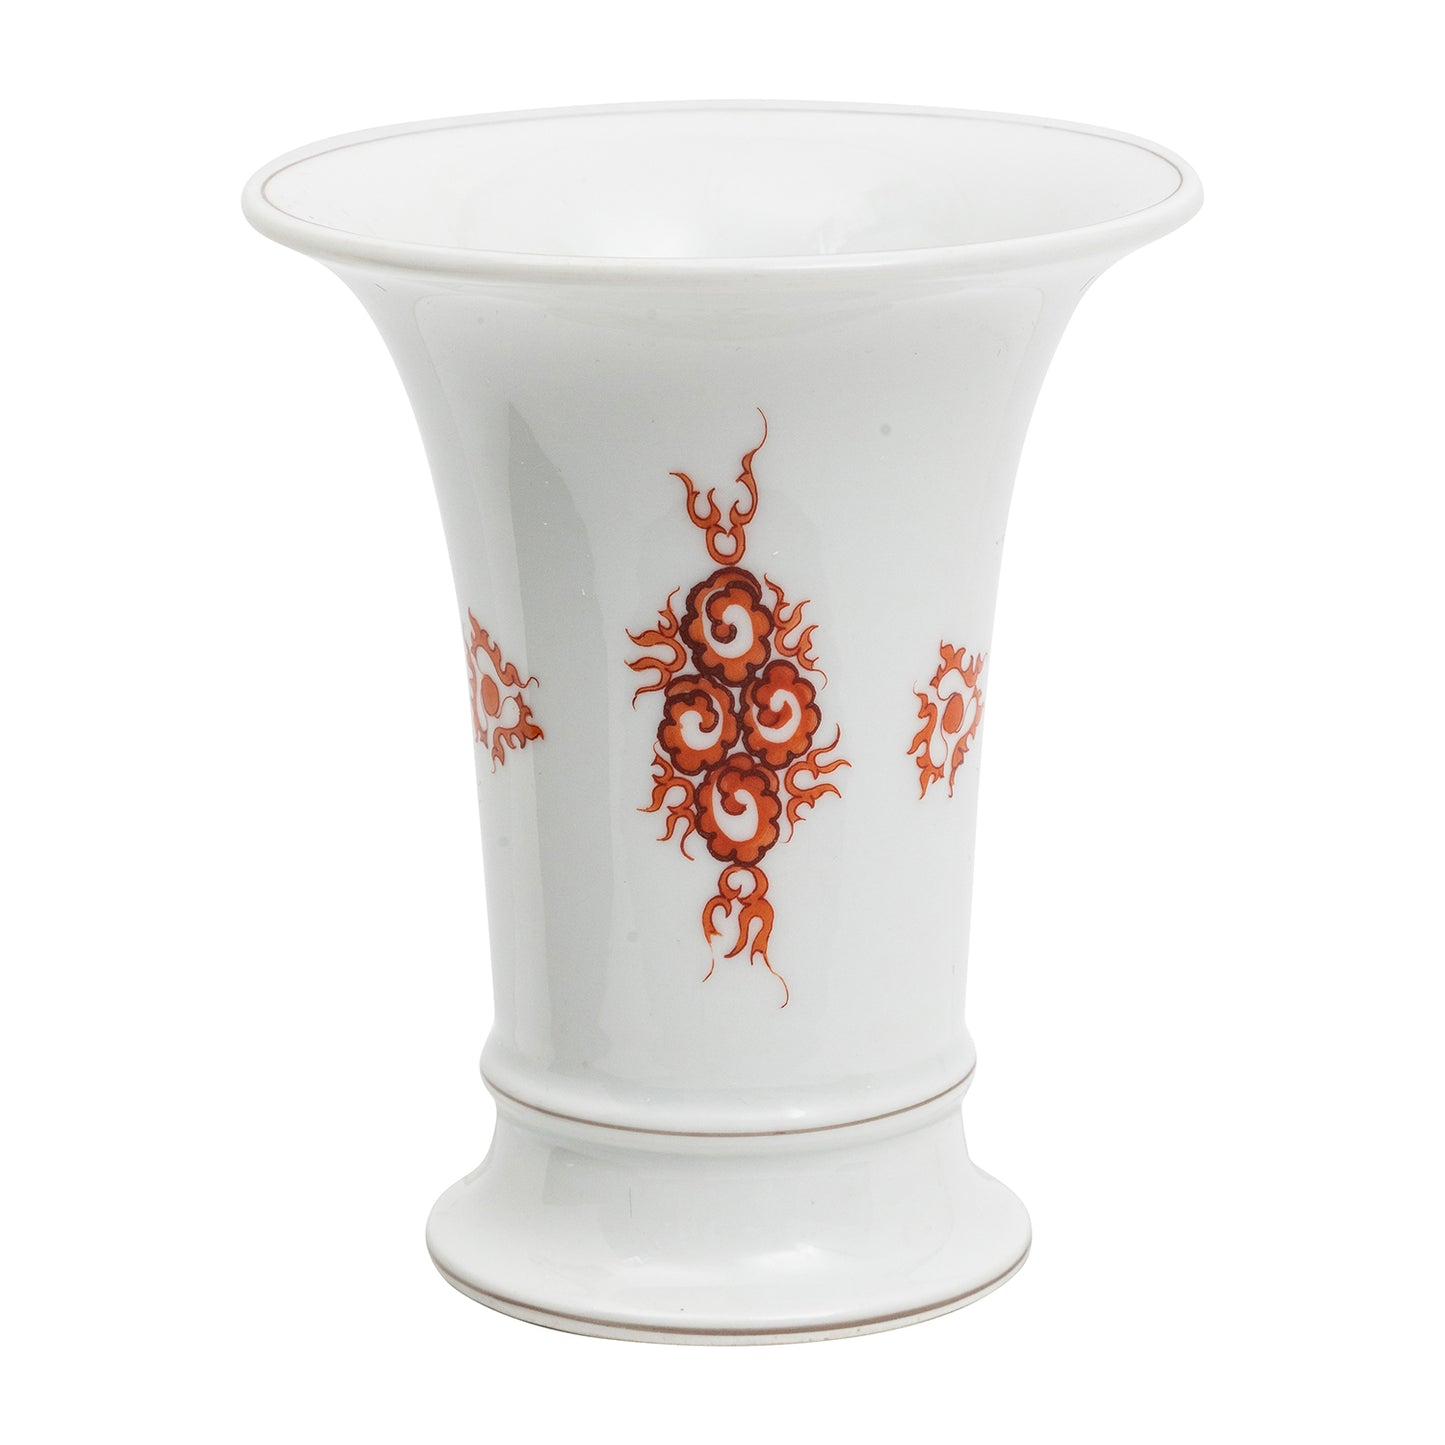 Meissen Porcelain and Red Fire Breathing Dragon Vase